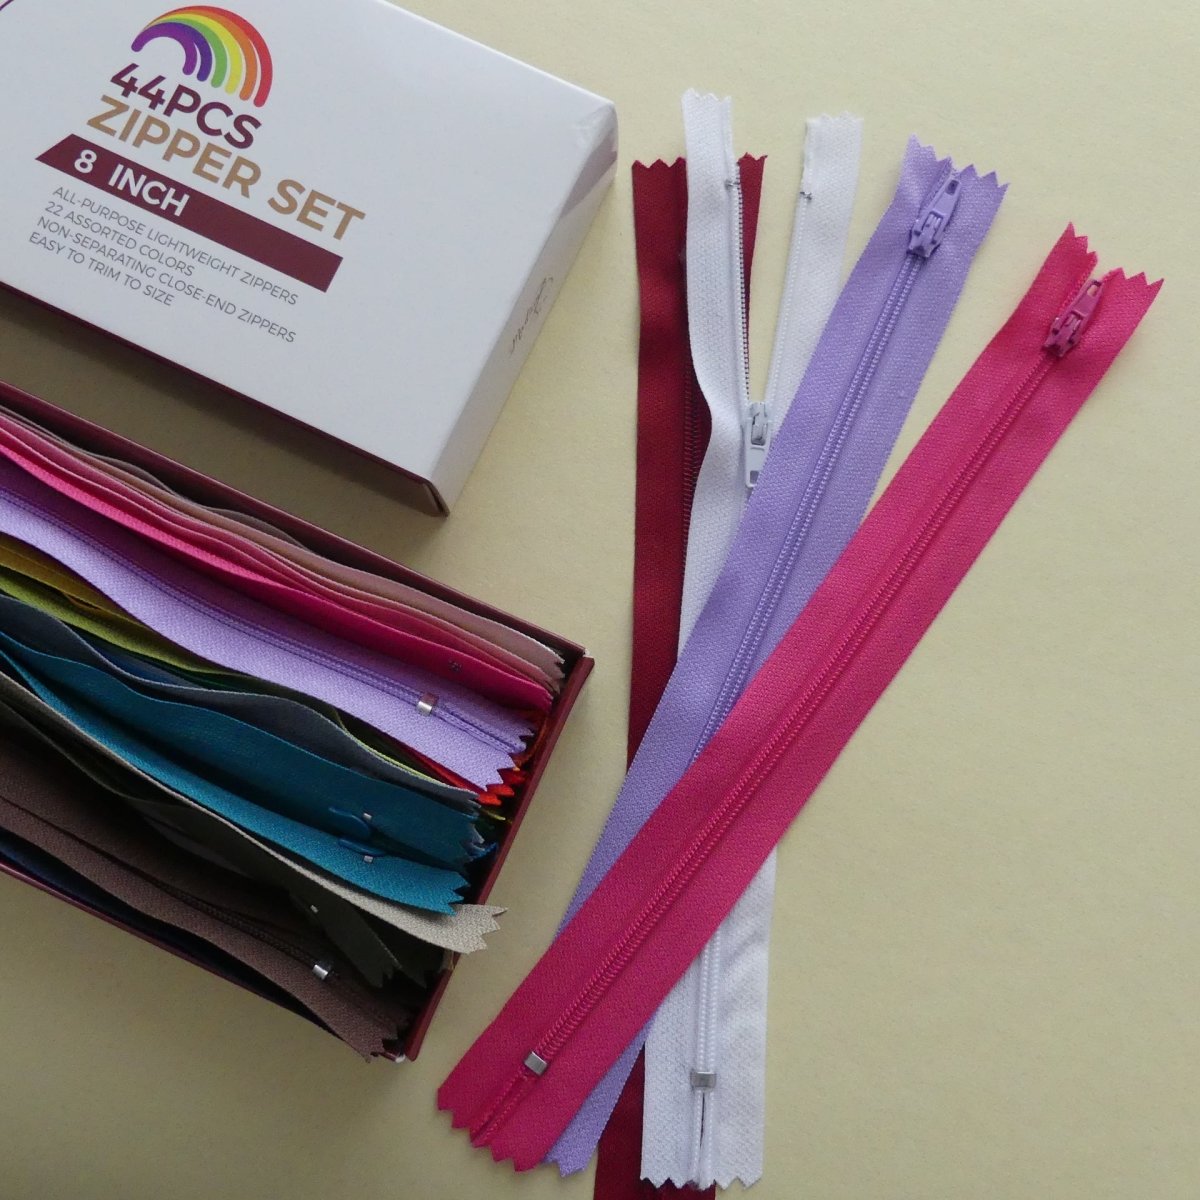 Madam Sew zippers, different colors and a box